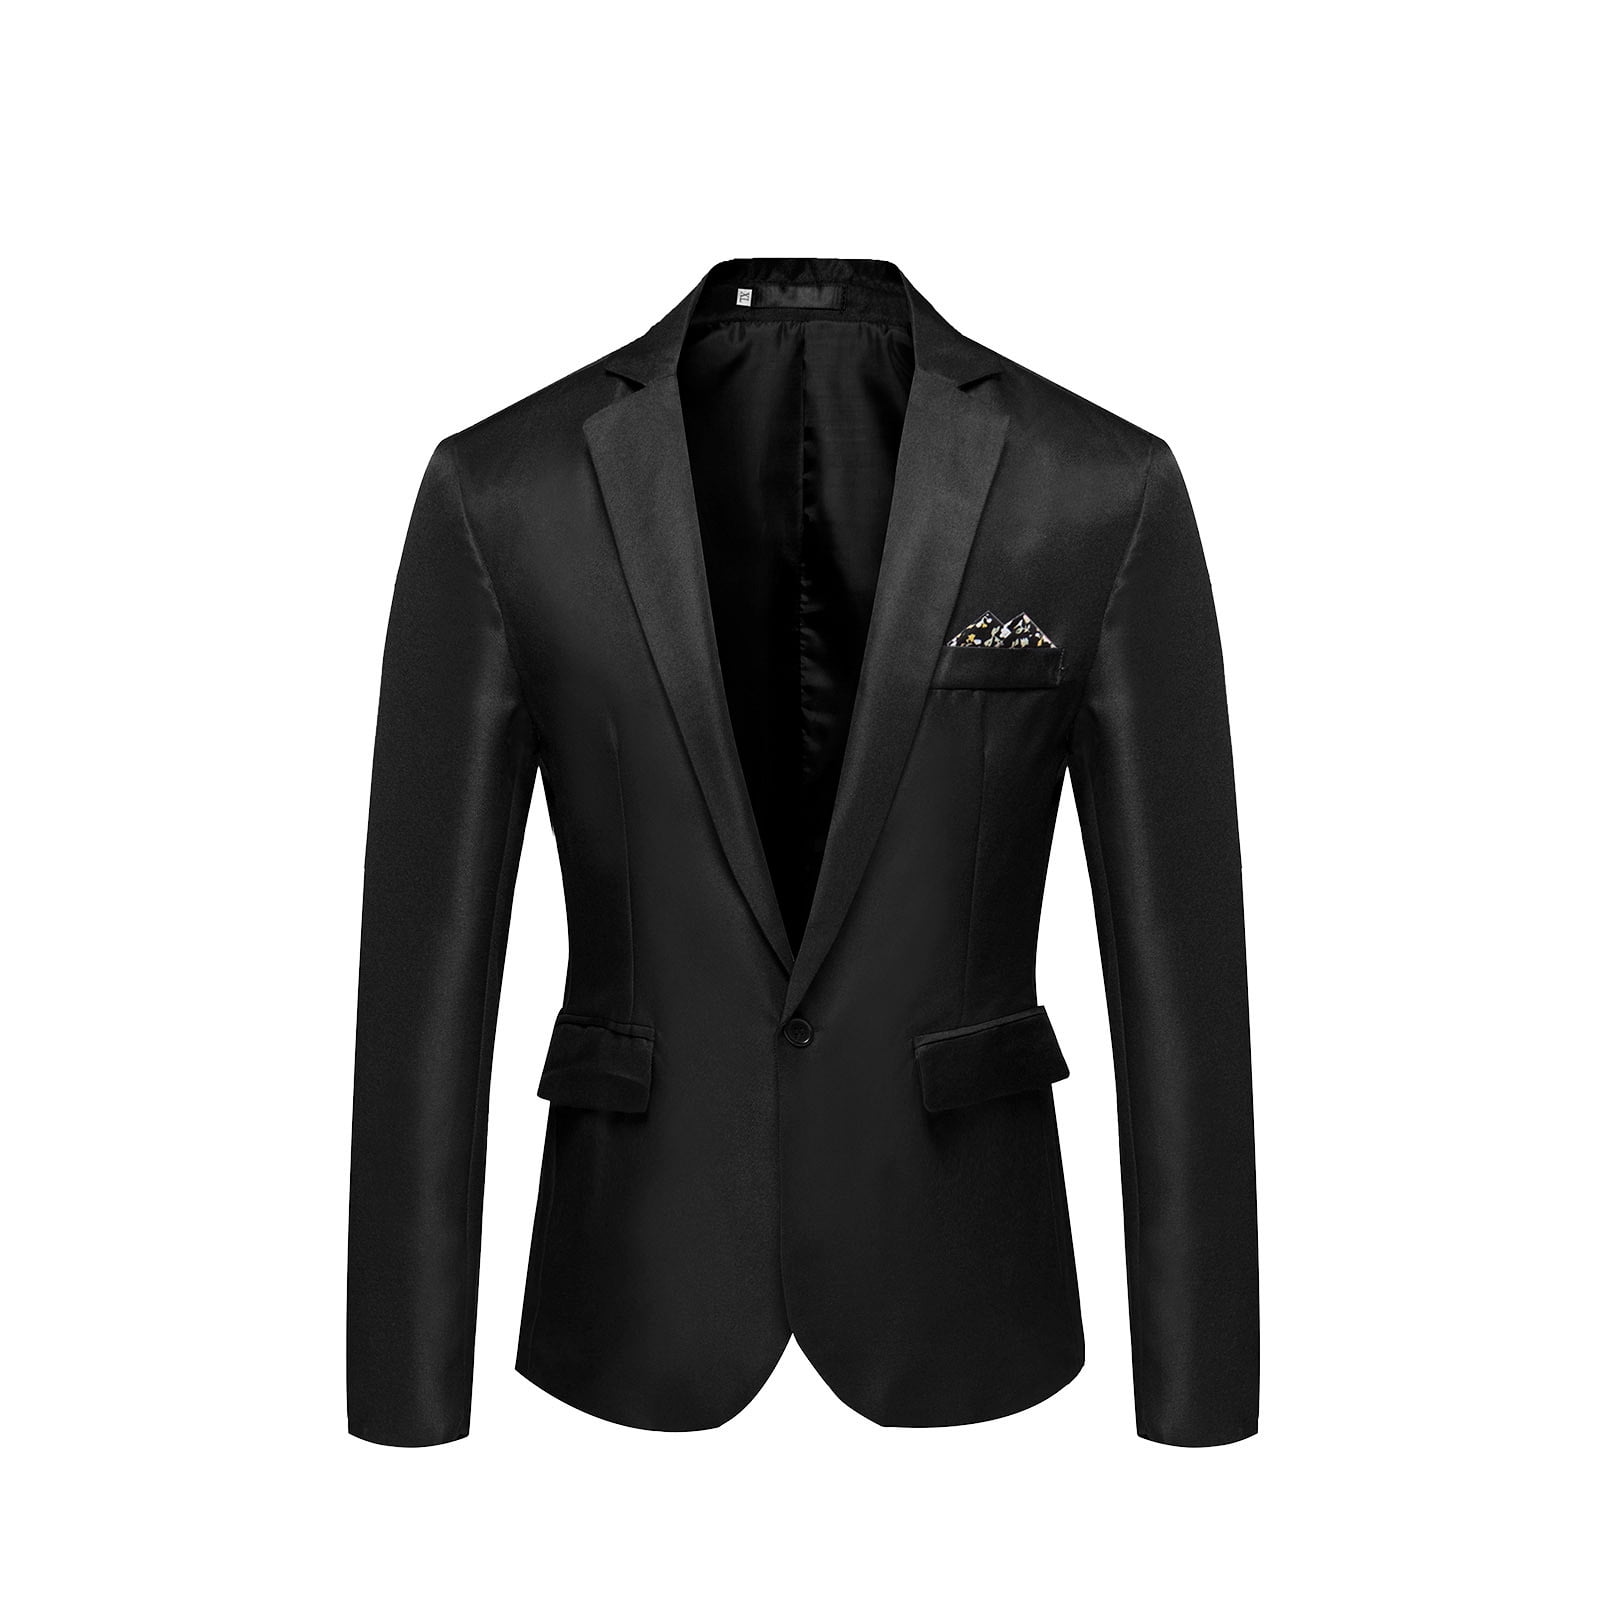 Men Fashion Solid Color High Quality Casual Single Breasted Suit ...